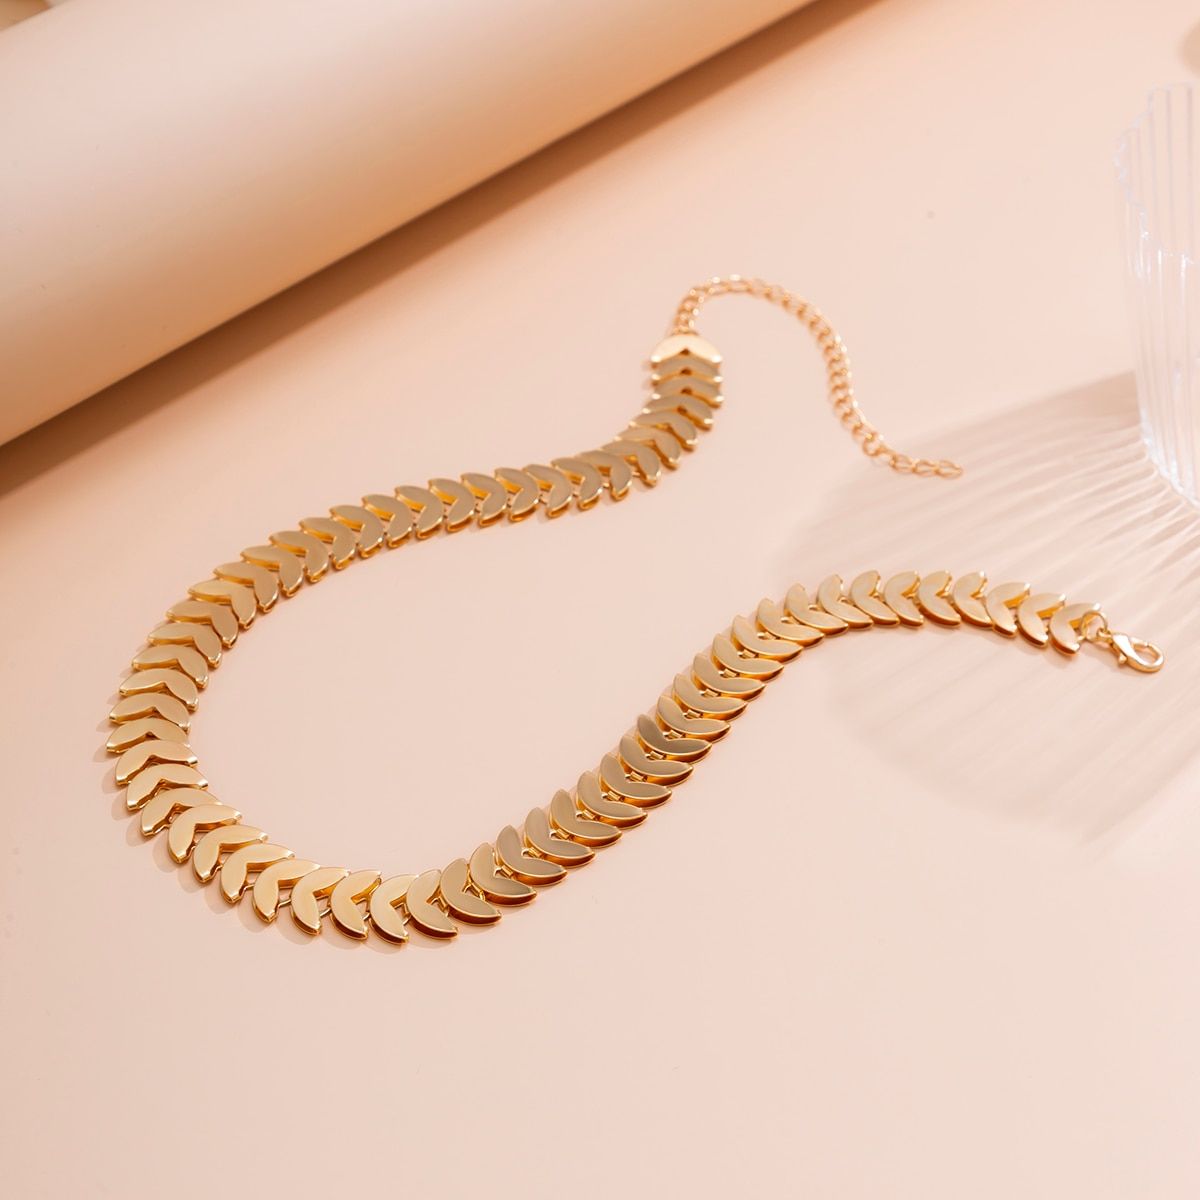 Gold Petal Choker Necklace for Women displayed on a pale pink surface with soft shadows, reflecting new fashion trends.